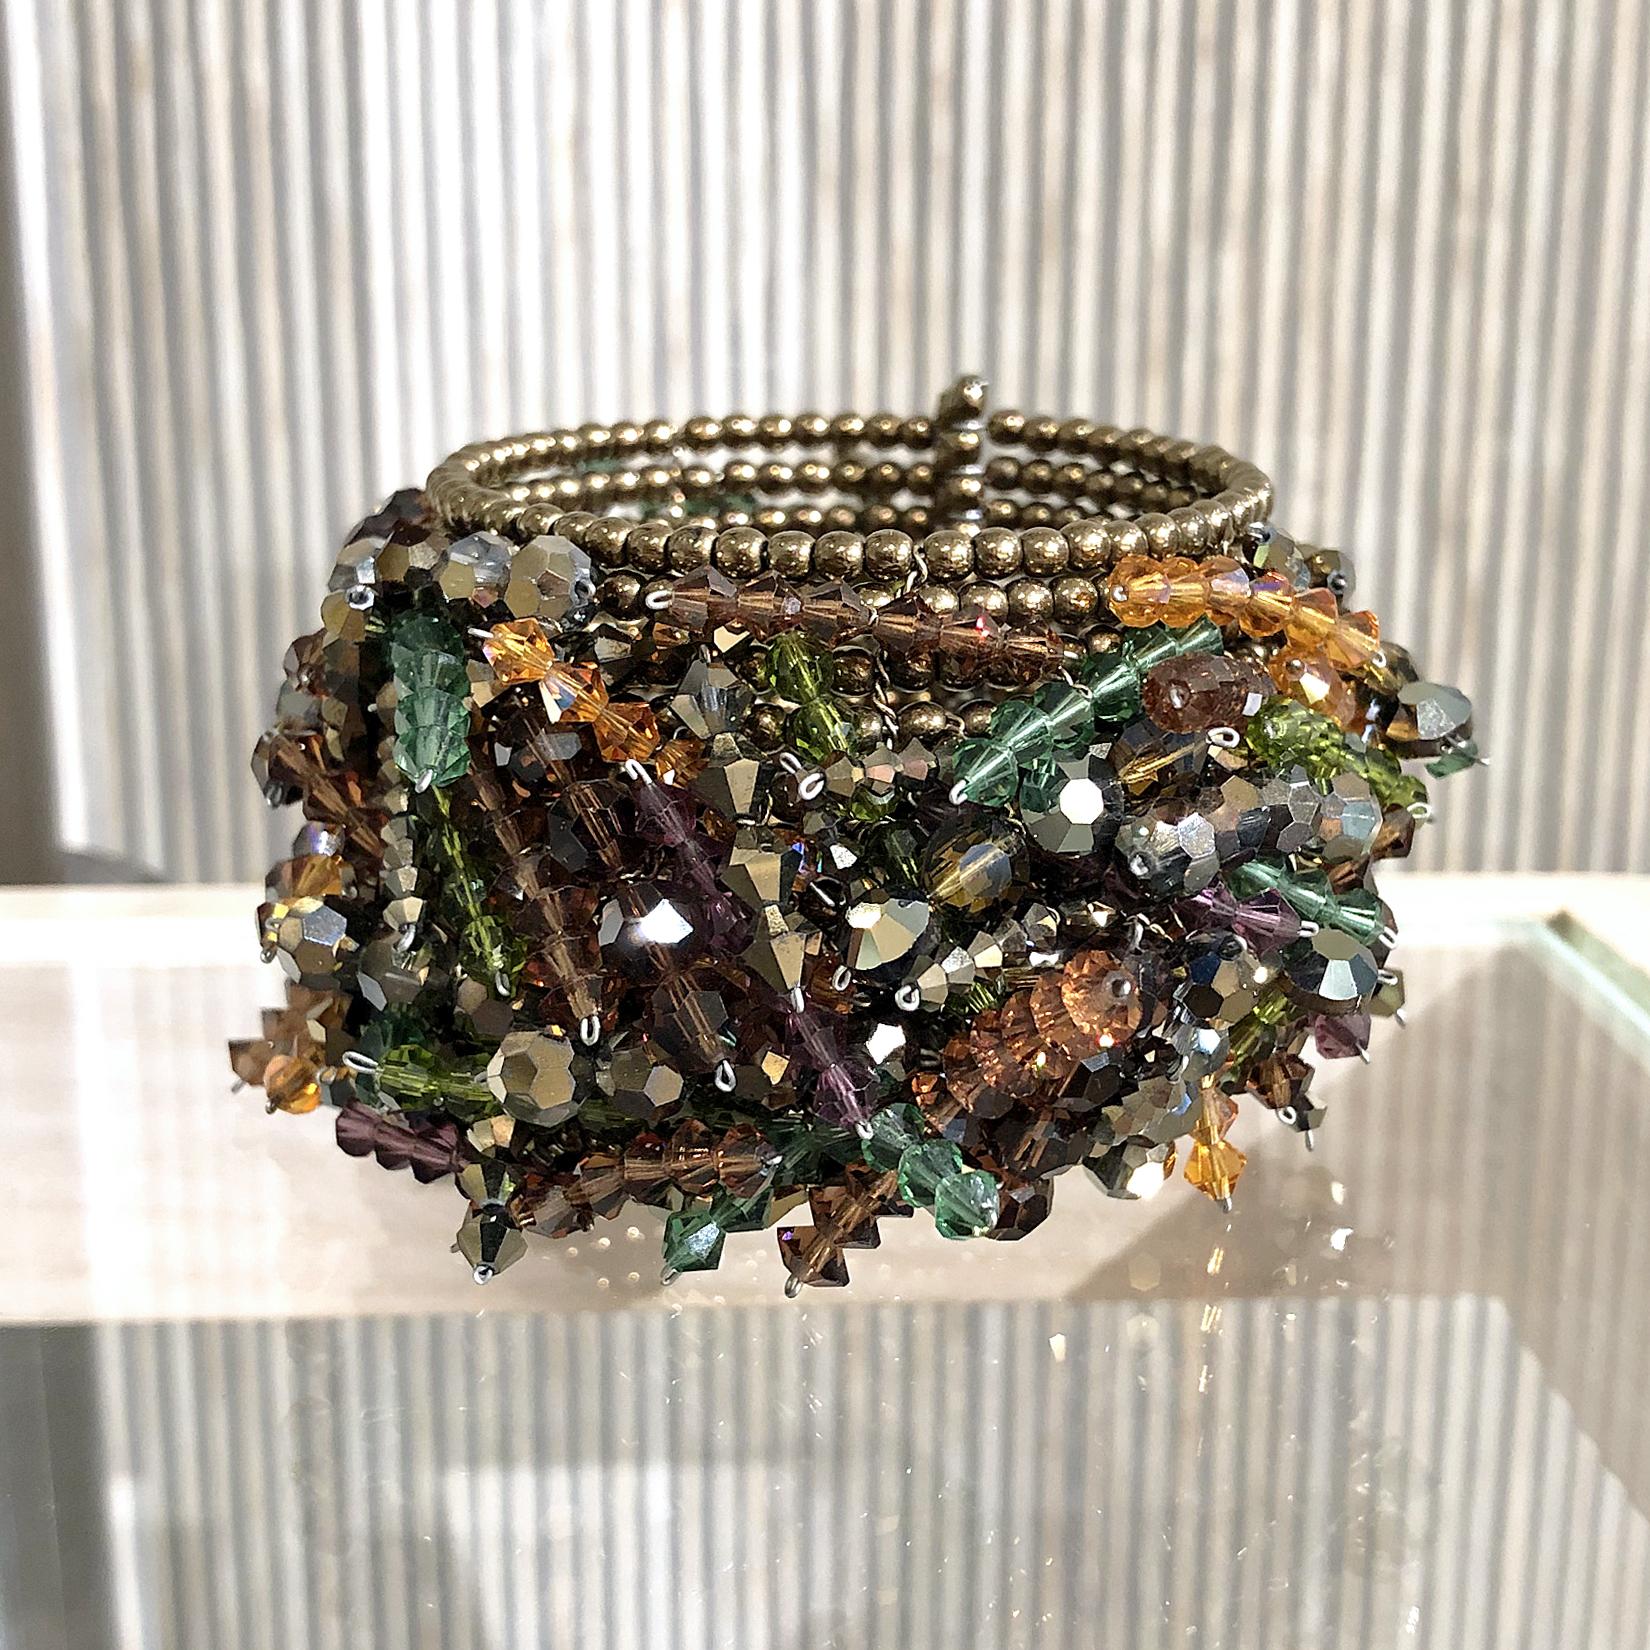 Chaos Cuff Bracelet handcrafted by jewelry artist Estyn Hulbert with thirteen rows of assorted swarovski crystals intricately strung on a yellow gold filled chain with a bronze bead base. Very flexible, and easily stretches to open and close